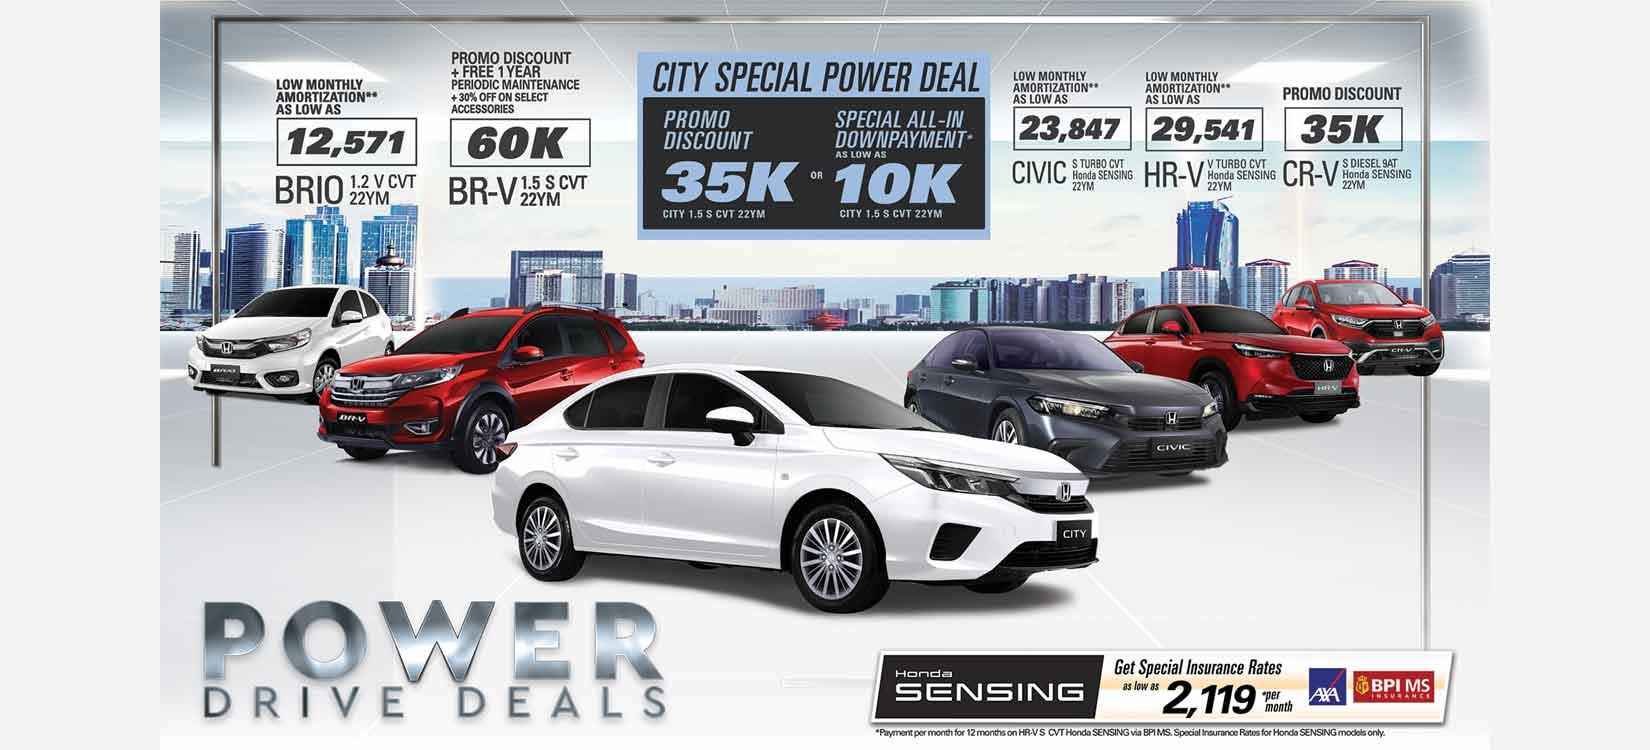 Rain with excitement this June as Honda extends BR-V promos and launches â€˜Power Drive Dealsâ€™ for select models